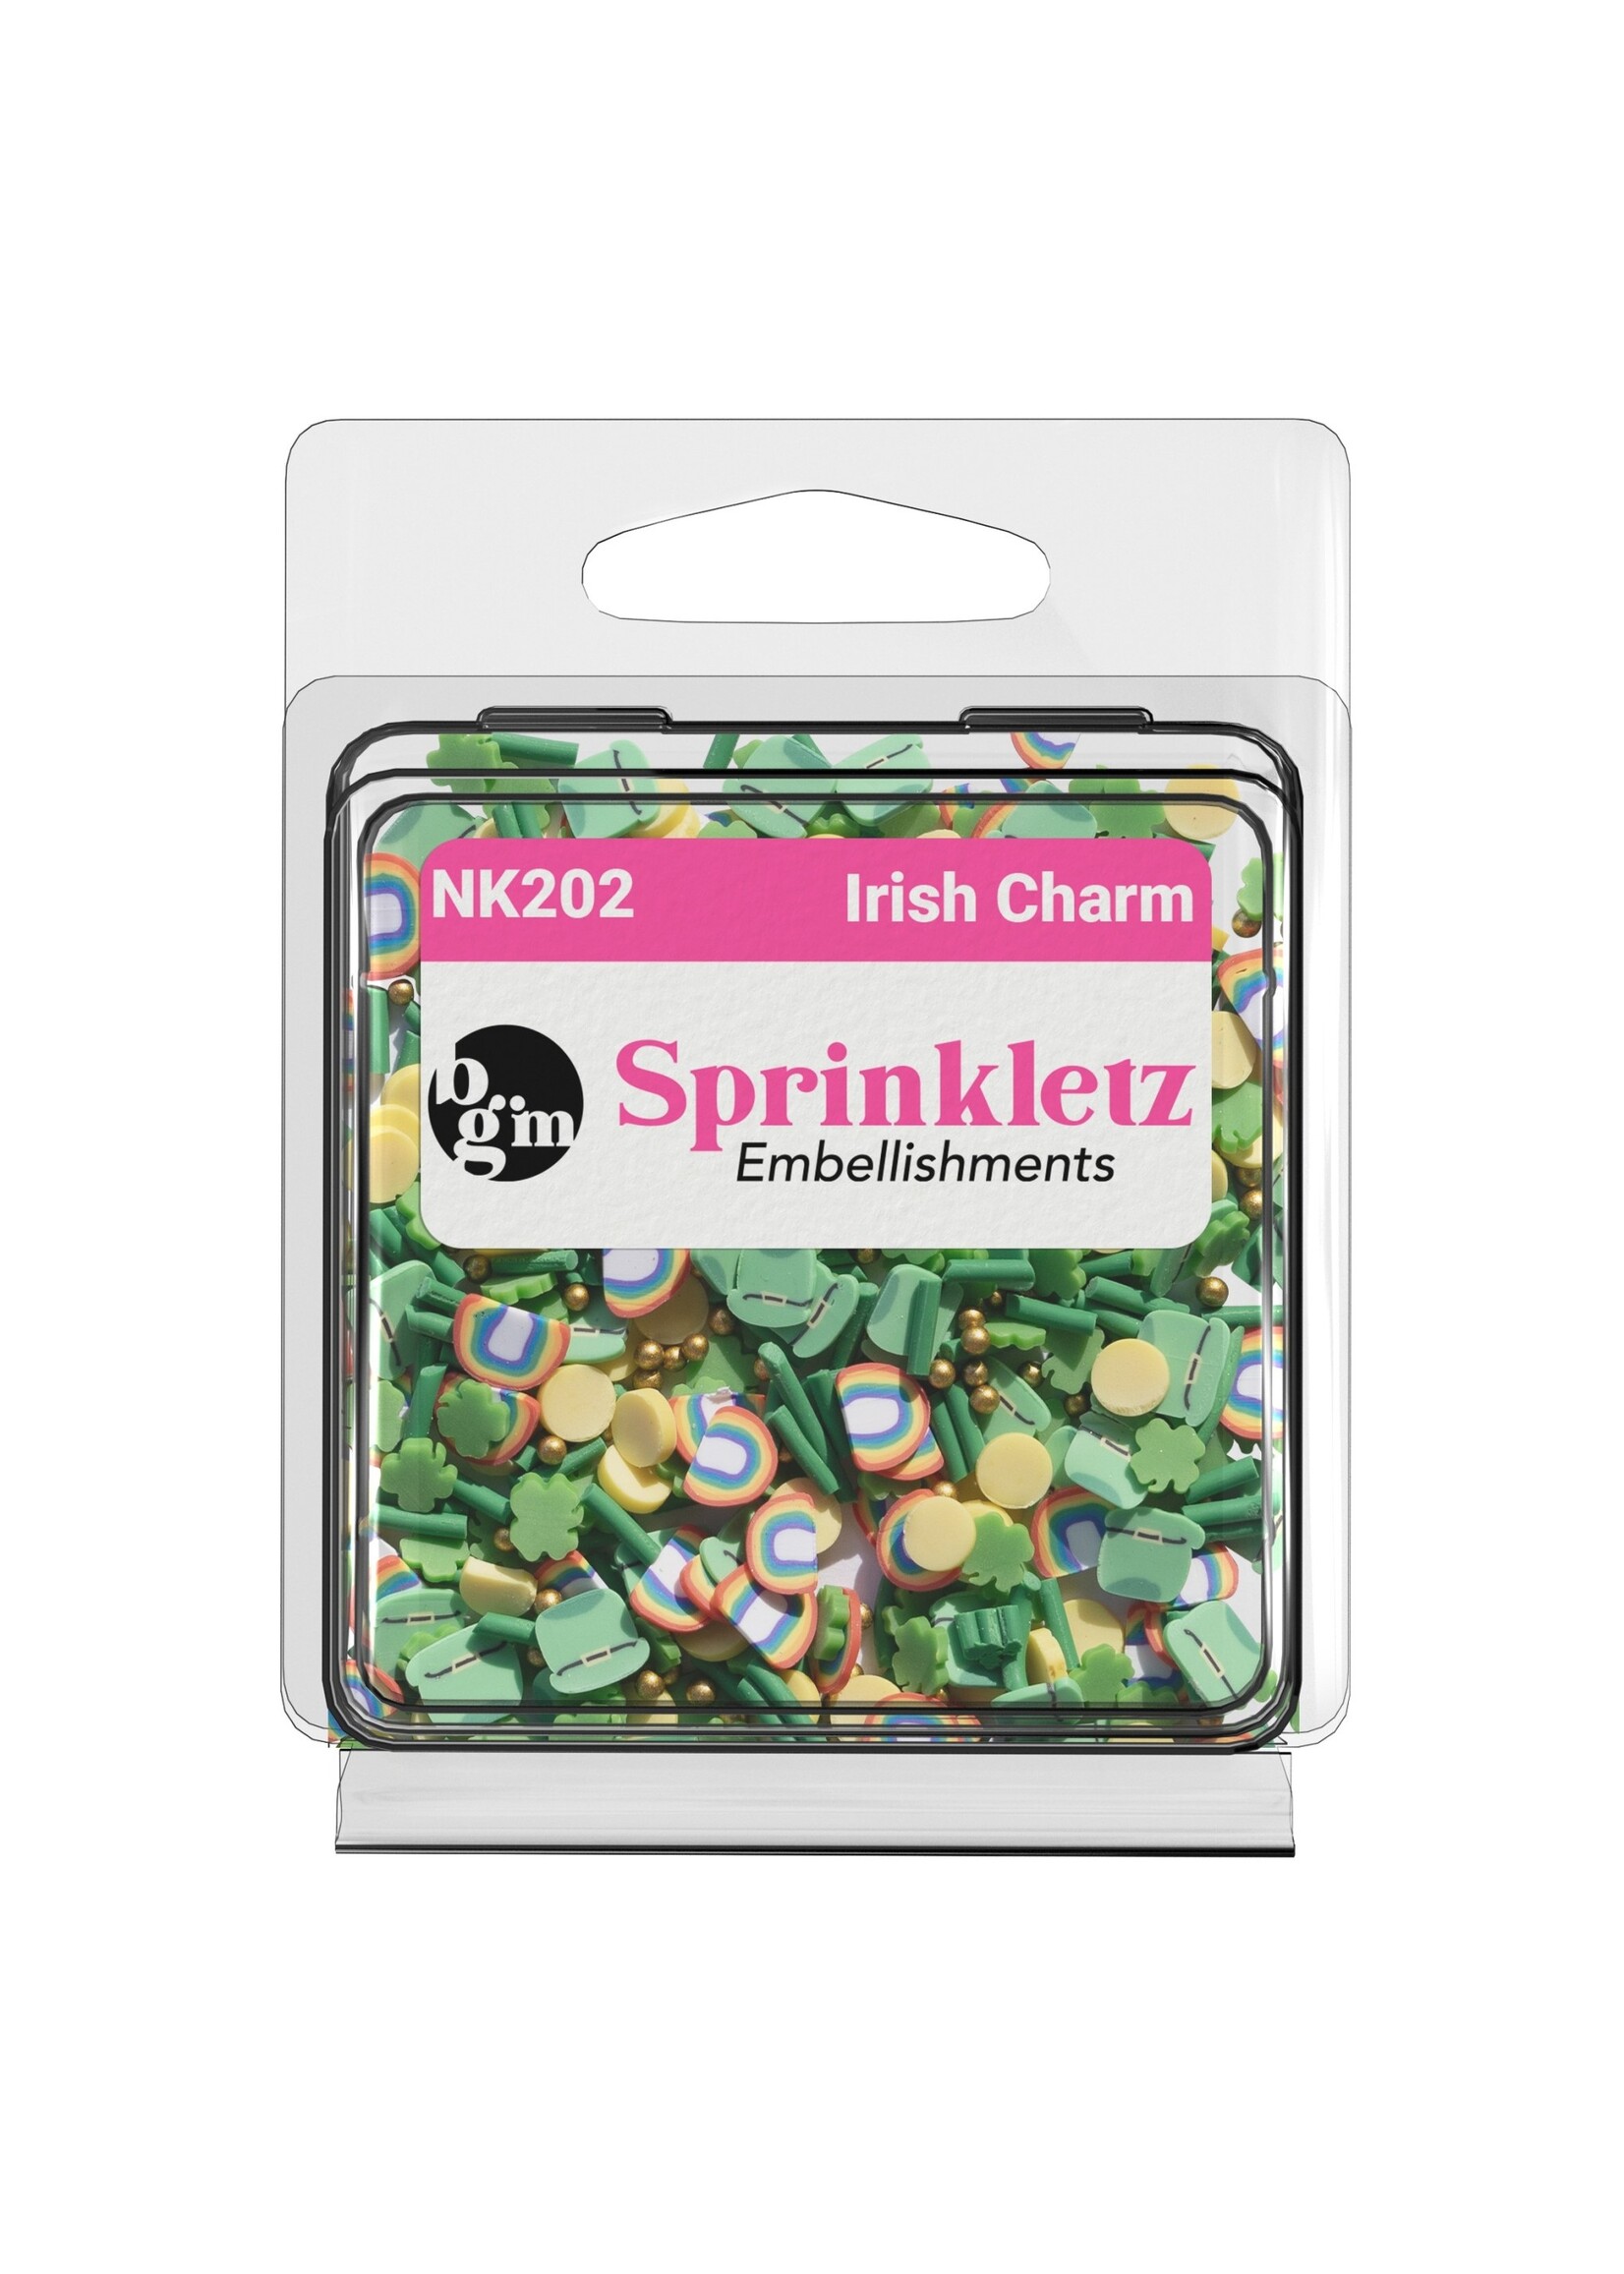 Buttons Galore & More Irish Charm Sprinkletz by Buttons Galore & More